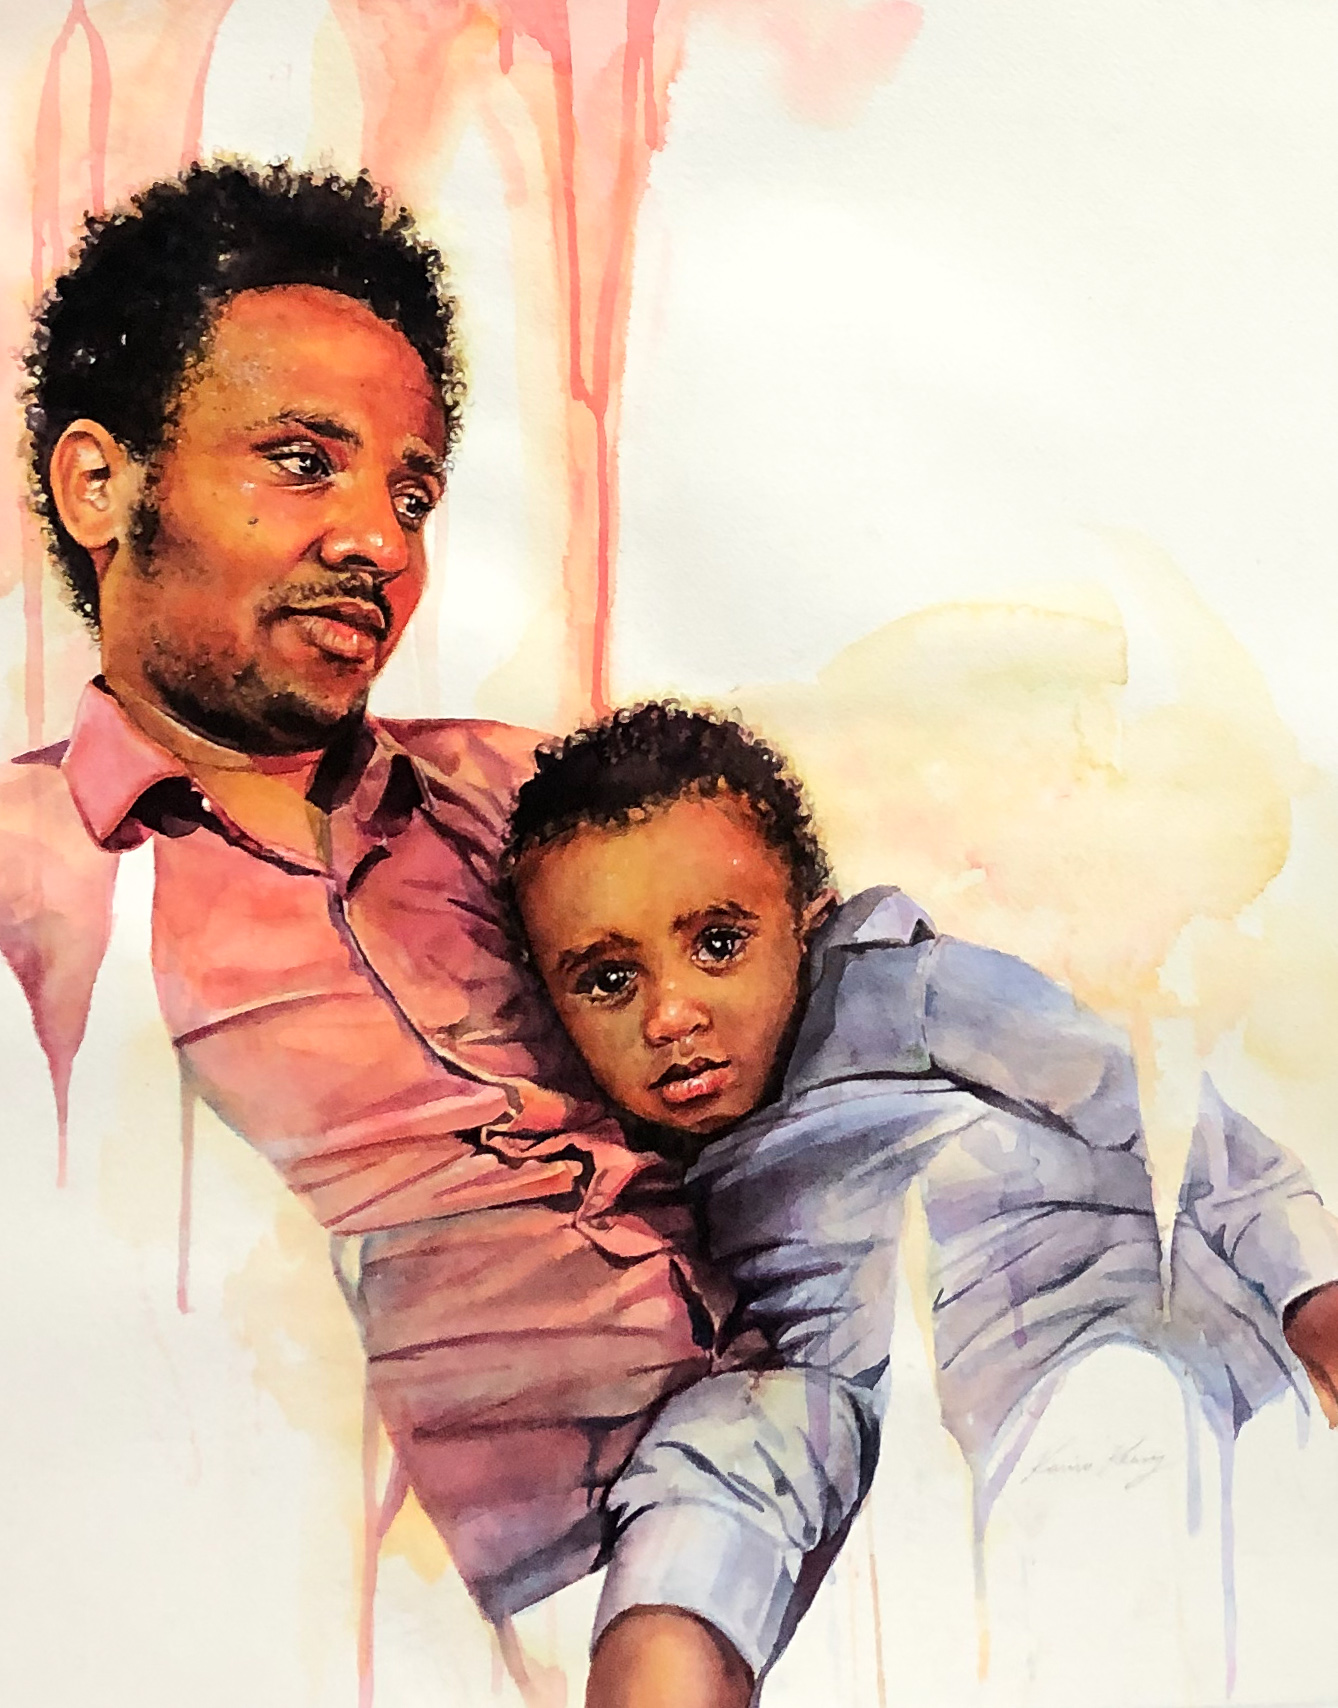 Watercolor realism painting portraits - man with boy